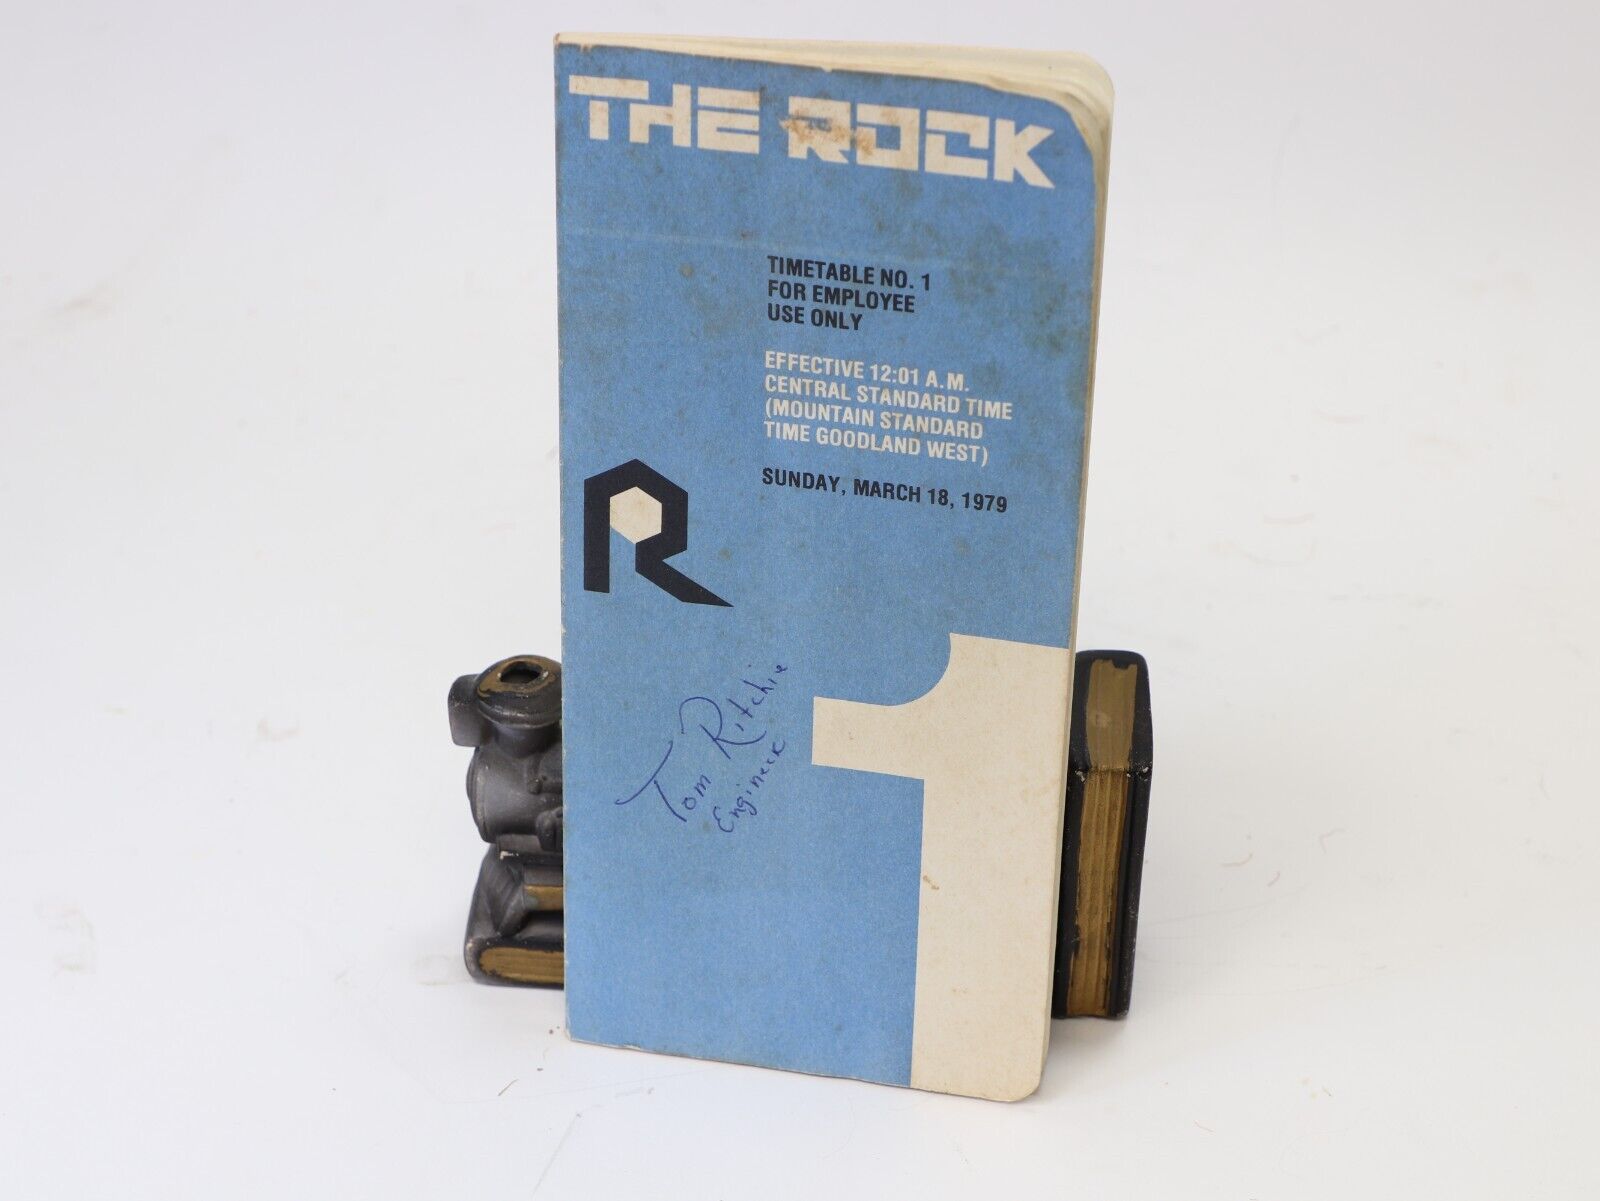 1979 The Rock Employee Timetable No. 1 with Personal Note